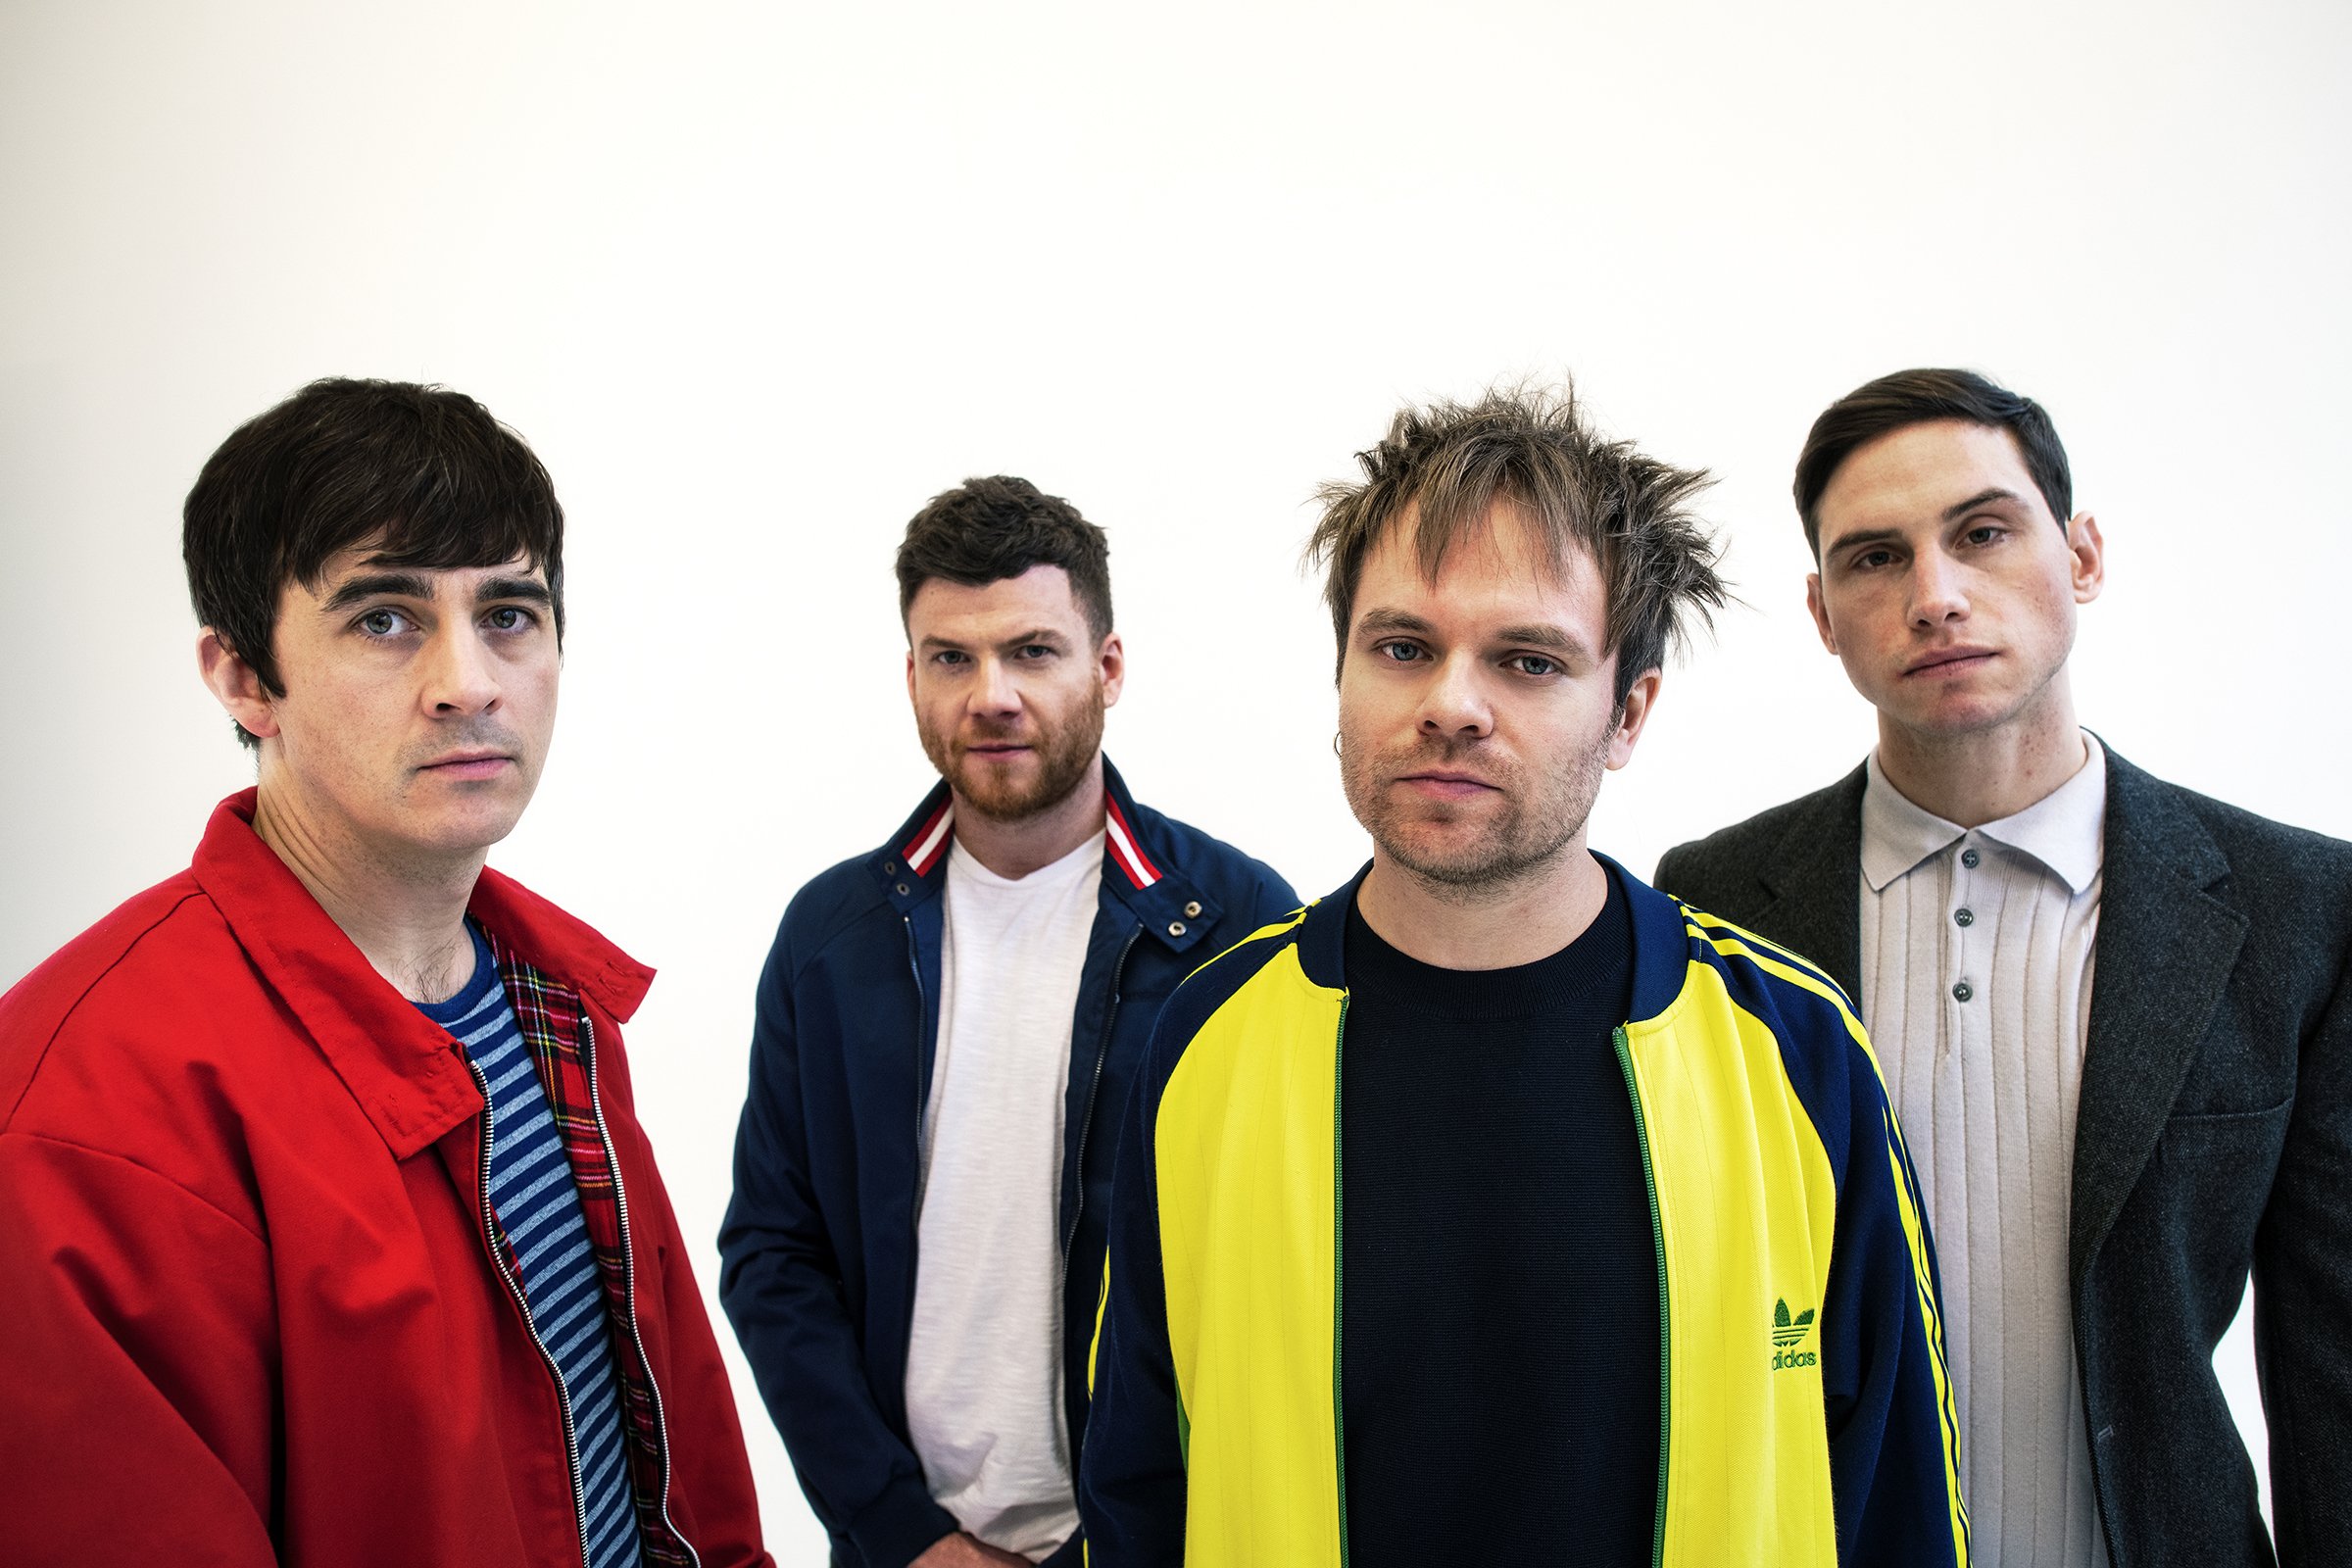 ENTER SHIKARI announce new album ‘Nothing Is True & Everything Is Possible’, released 17 April 1